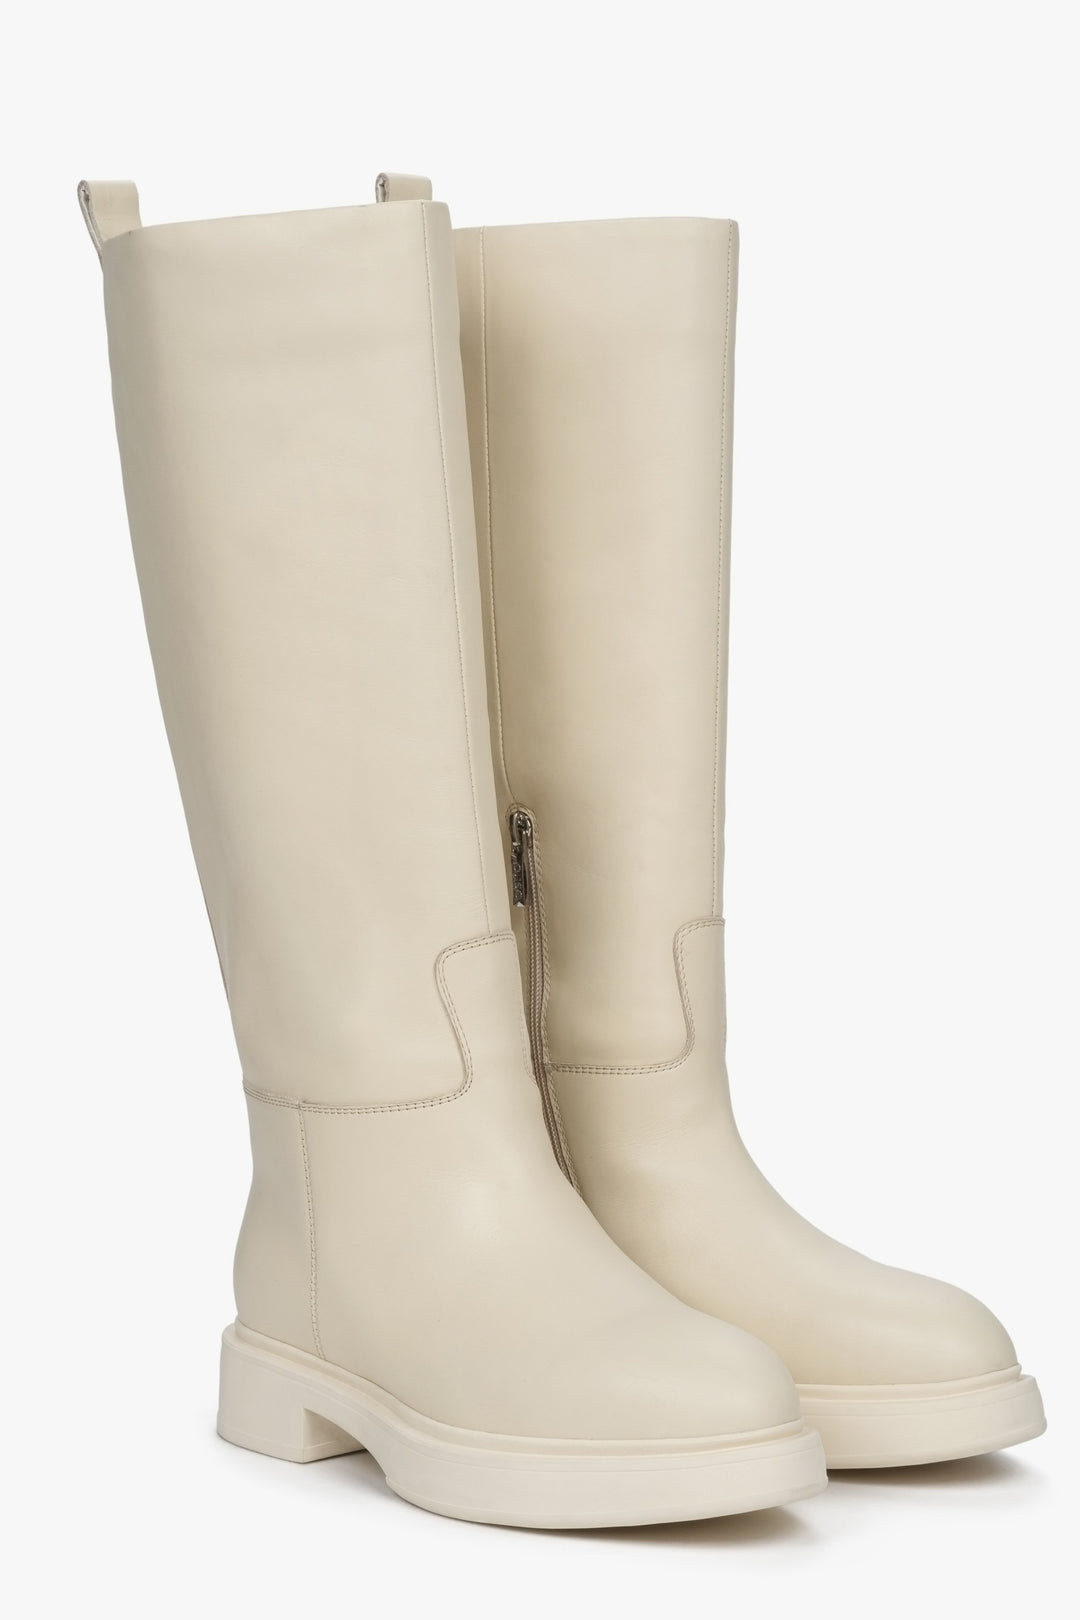 Elevated, beige women's winter boots by Estro made of genuine leather with natural fur lining.